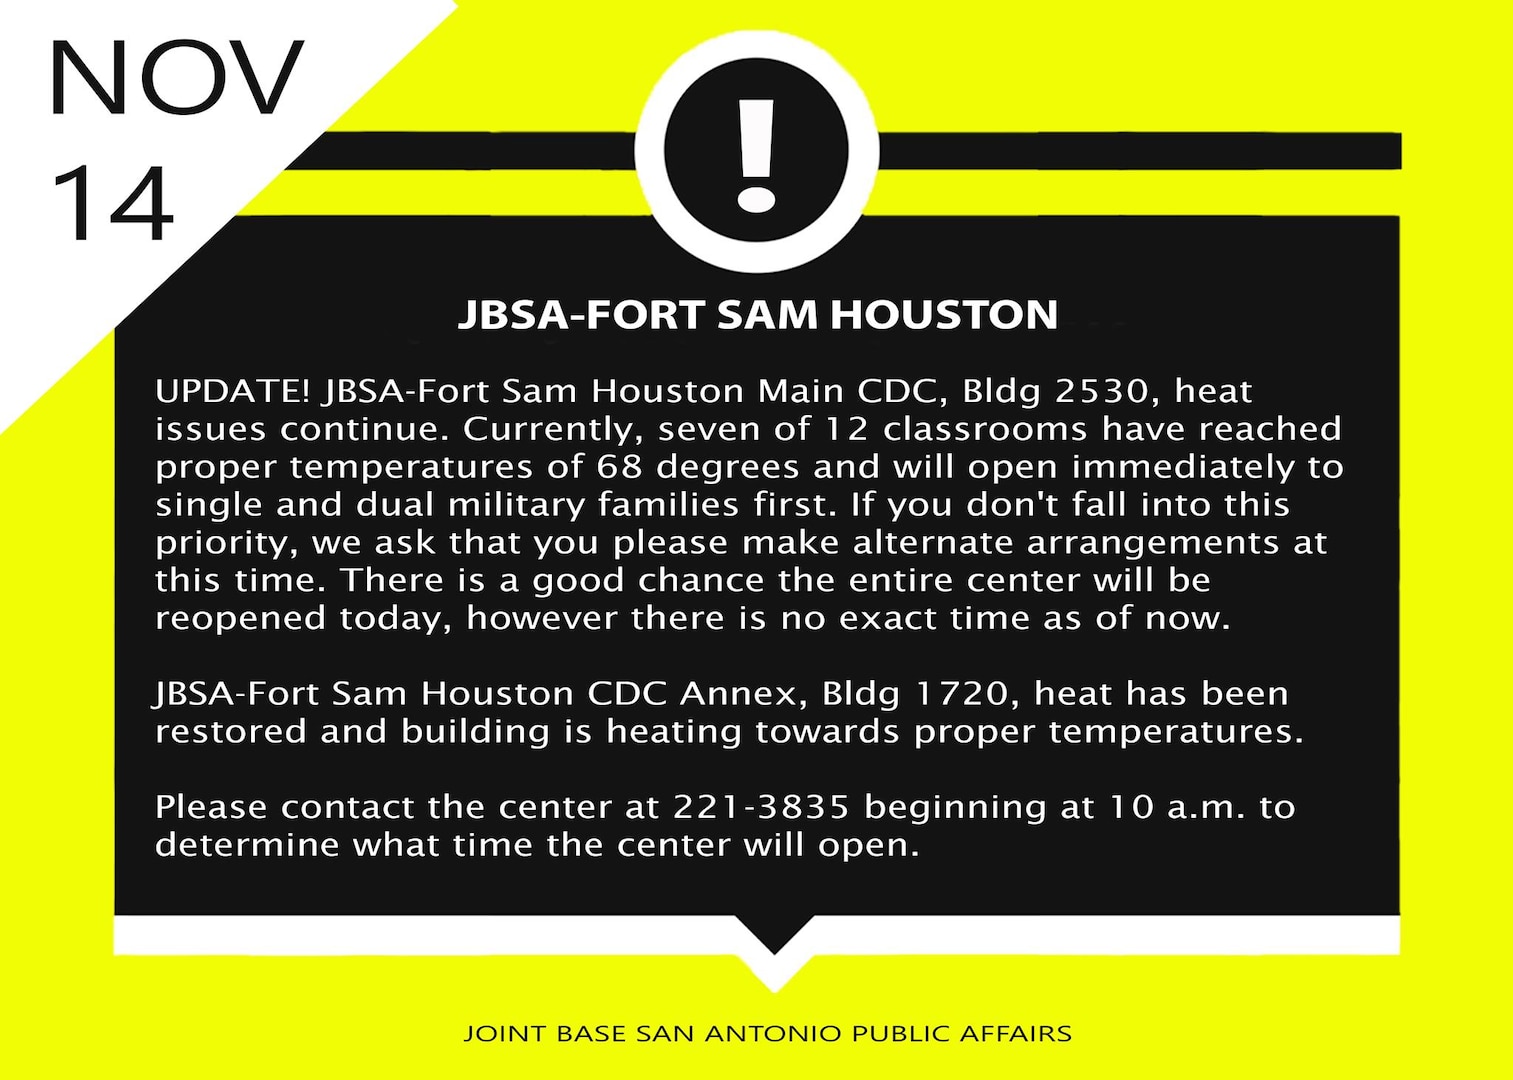 JBSA-Fort Sam Houston Main CDC, Bldg 2530 heat issues continue.  Currently
seven of 12 classrooms have reached proper temperatures of 68 degrees and
will open immediately to single and dual military families first.  
If you don't fall into this priority, we ask that you please make alternate
arrangements at this time.  There is a good chance the entire center will be
reopened today, however there is no exact time as of now.

JBSA-Fort Sam Houston CDC Annex, Bldg 1720, heat has been restored and
building is heating towards proper temperatures.  Please contact the center
at 221-3835 beginning at 10 a.m. to determine what time the center will
open.